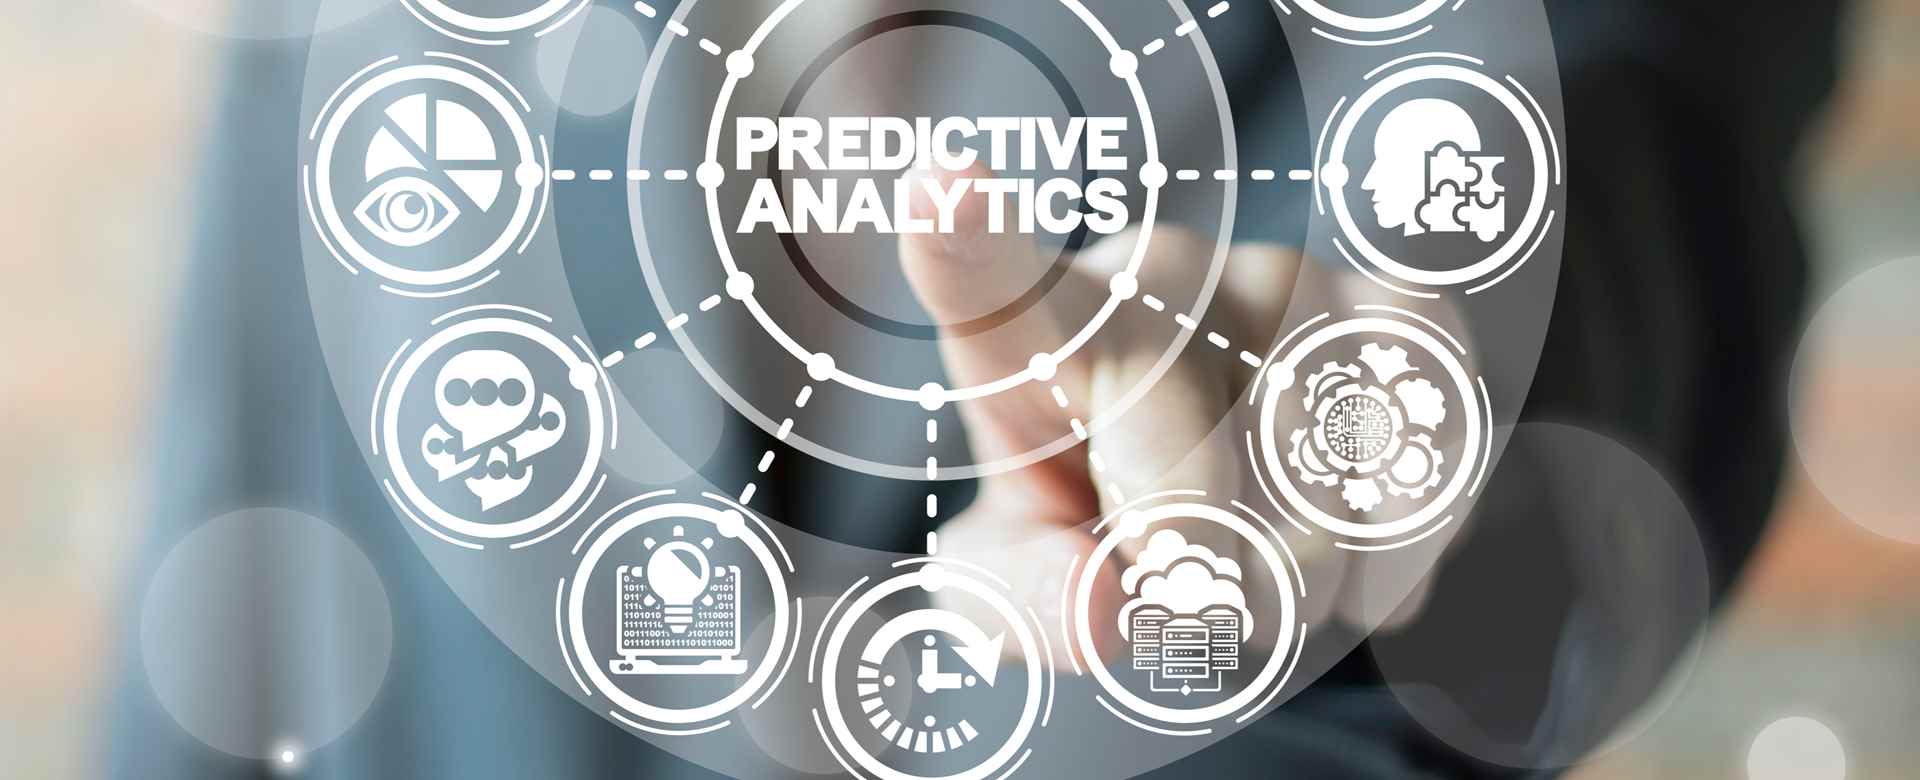 Predictive Analytics in Healthcare: Transitioning Data into Actionable Insight